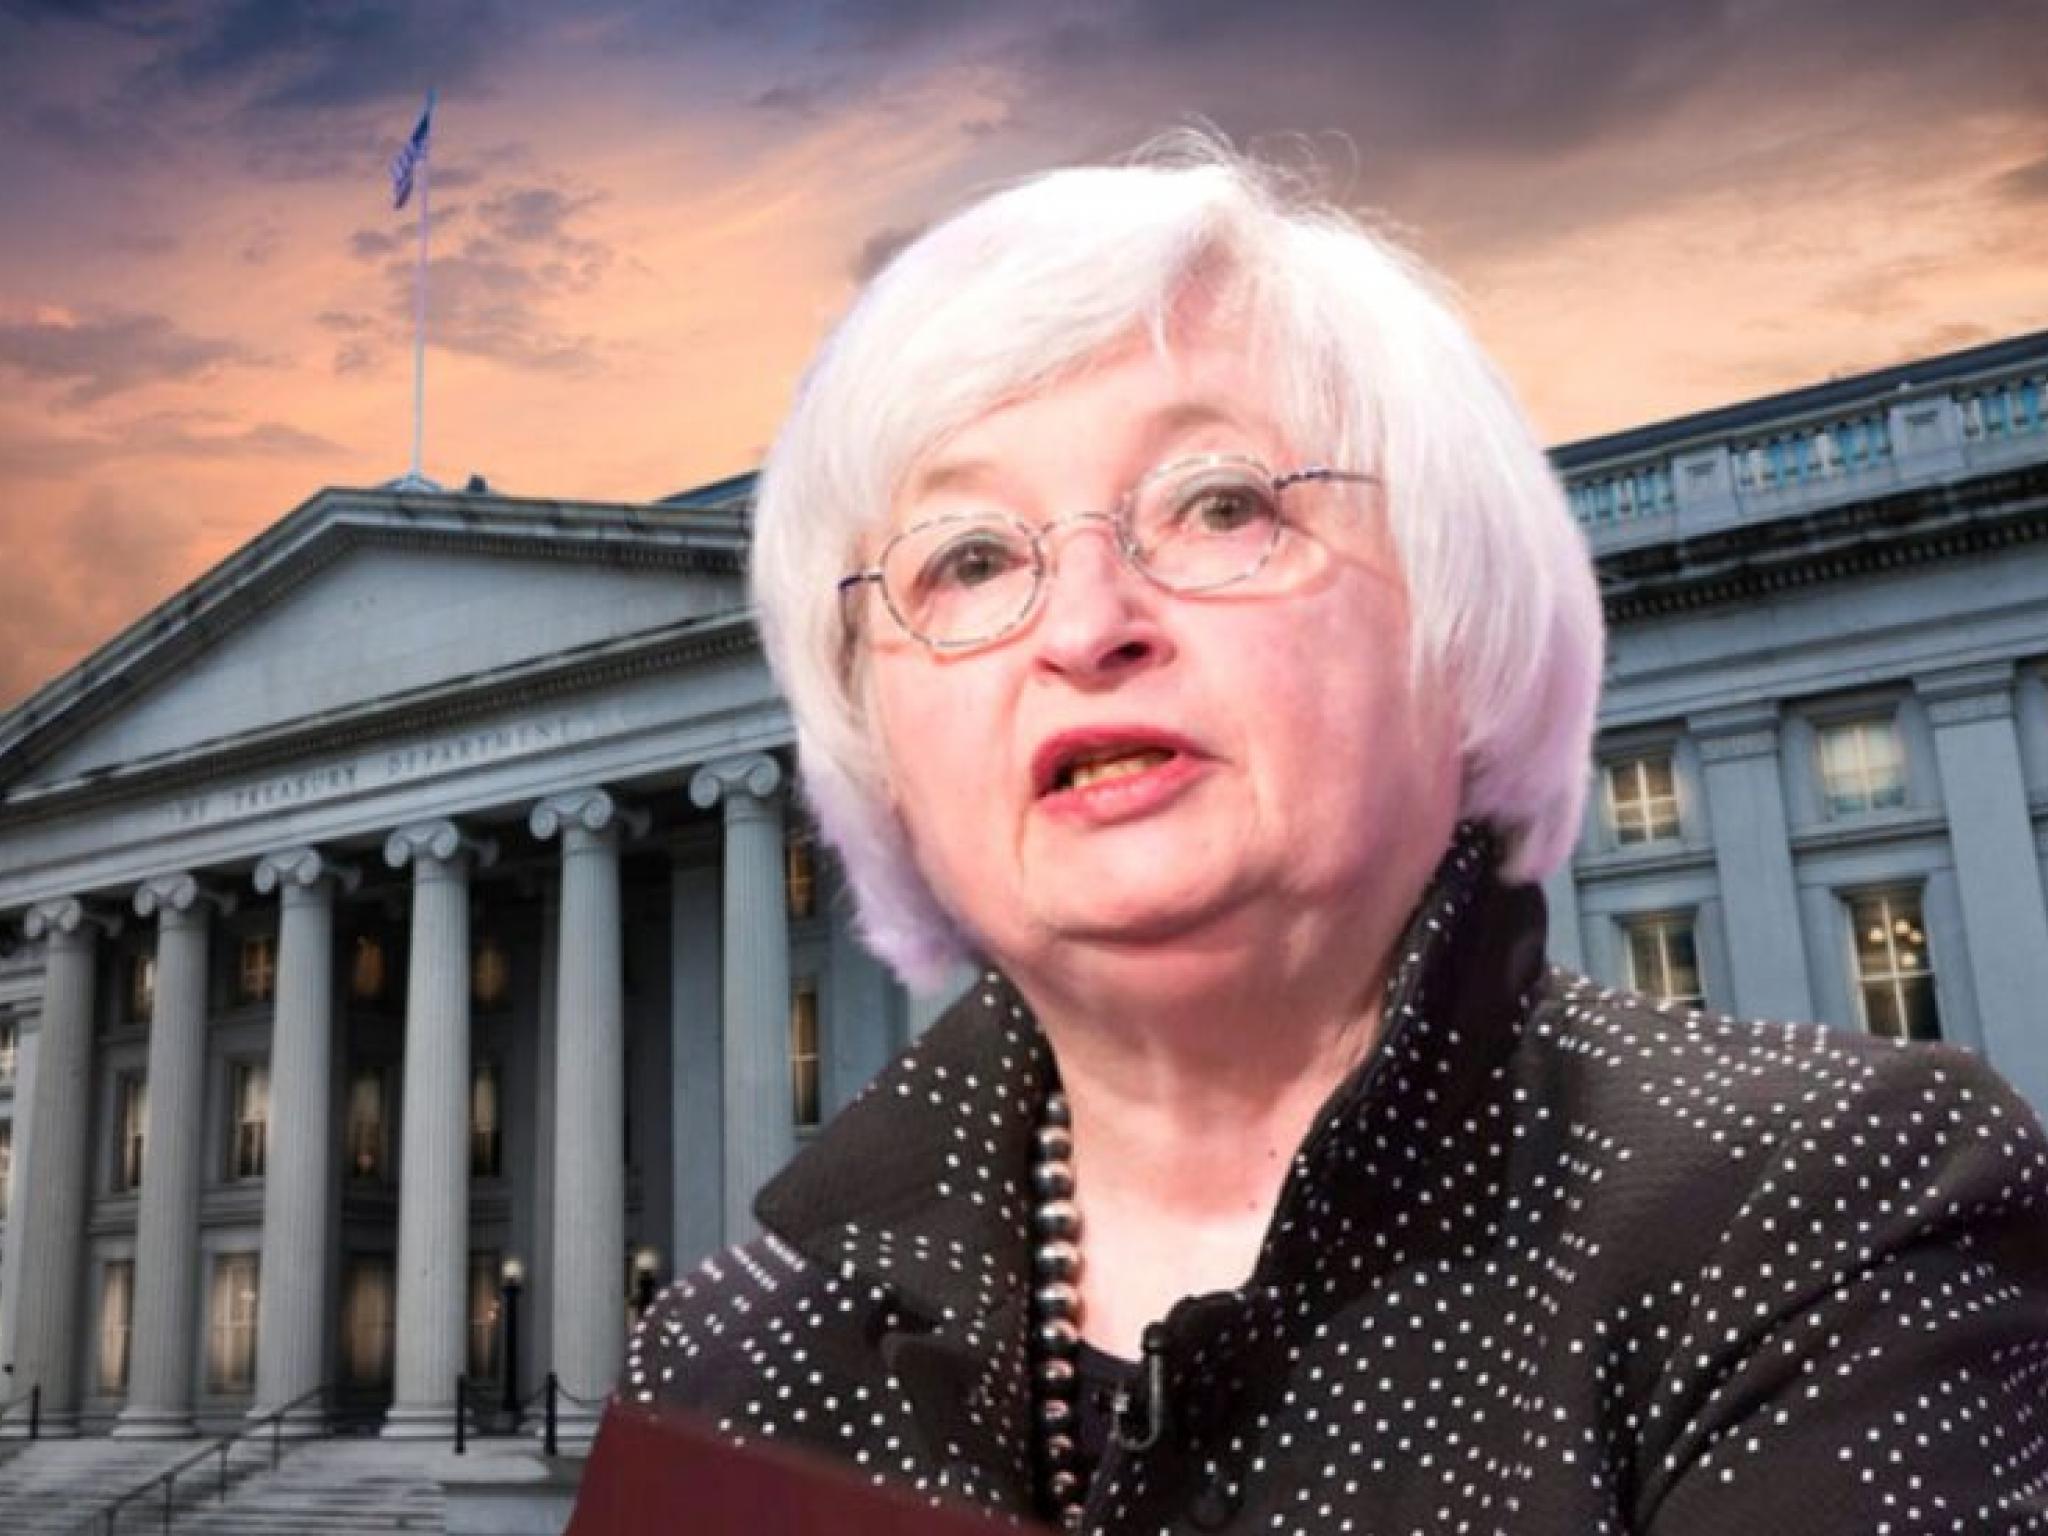  yellen-expresses-concerns-over-commercial-real-estate-stablecoin-risks-praises-us-economic-strength-headed-in-right-direction 